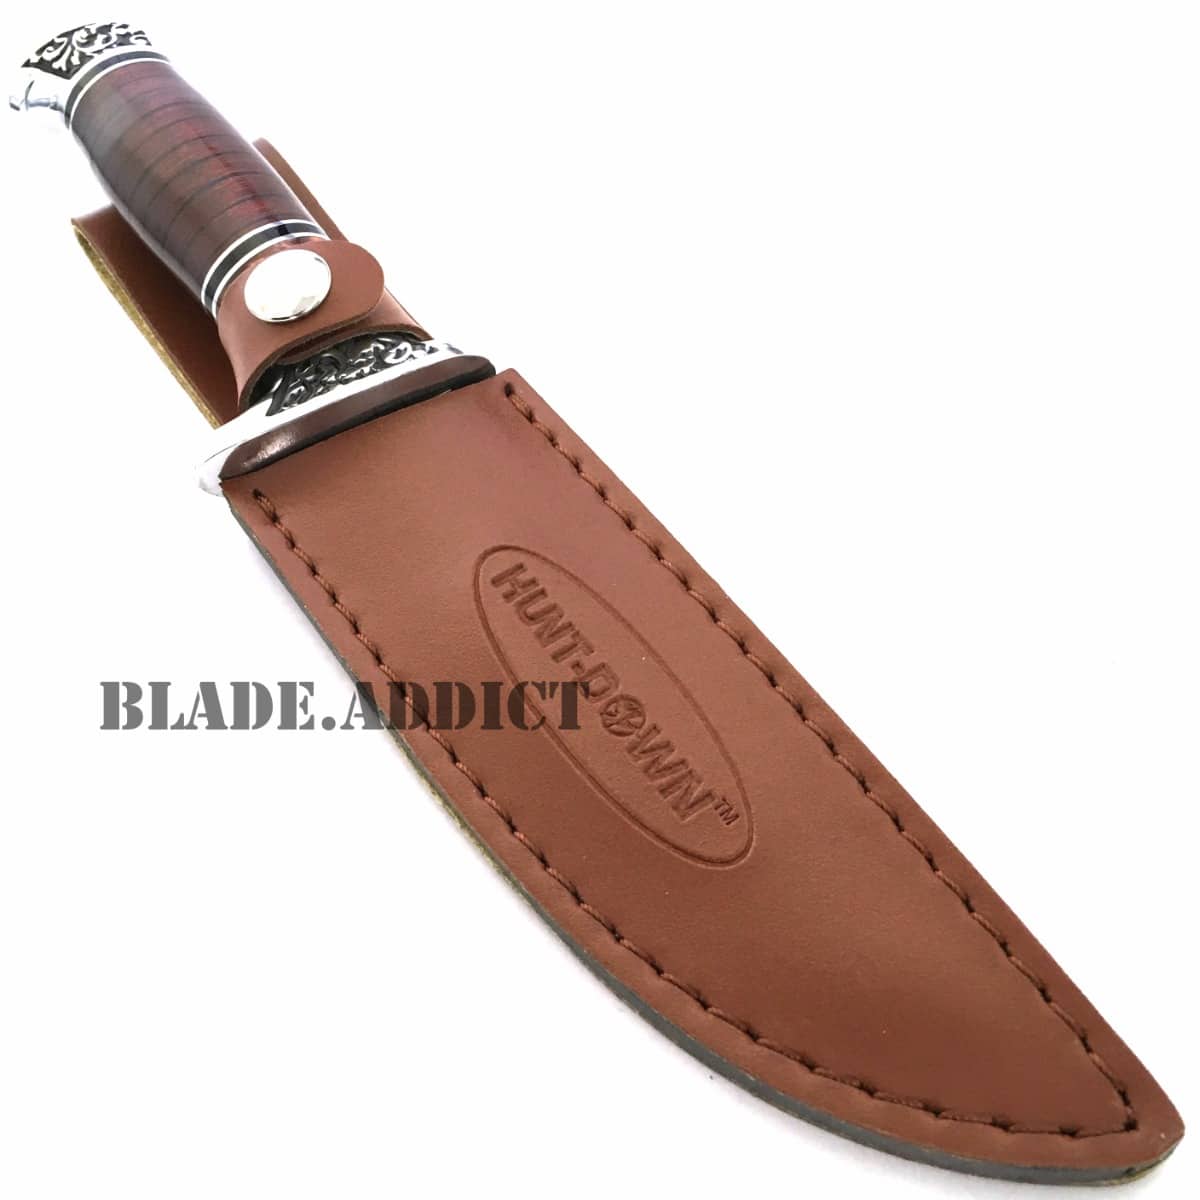 10" Full Tang Fixed Blade Knife Hunting Skinning Survival Army Bowie Blade Wood